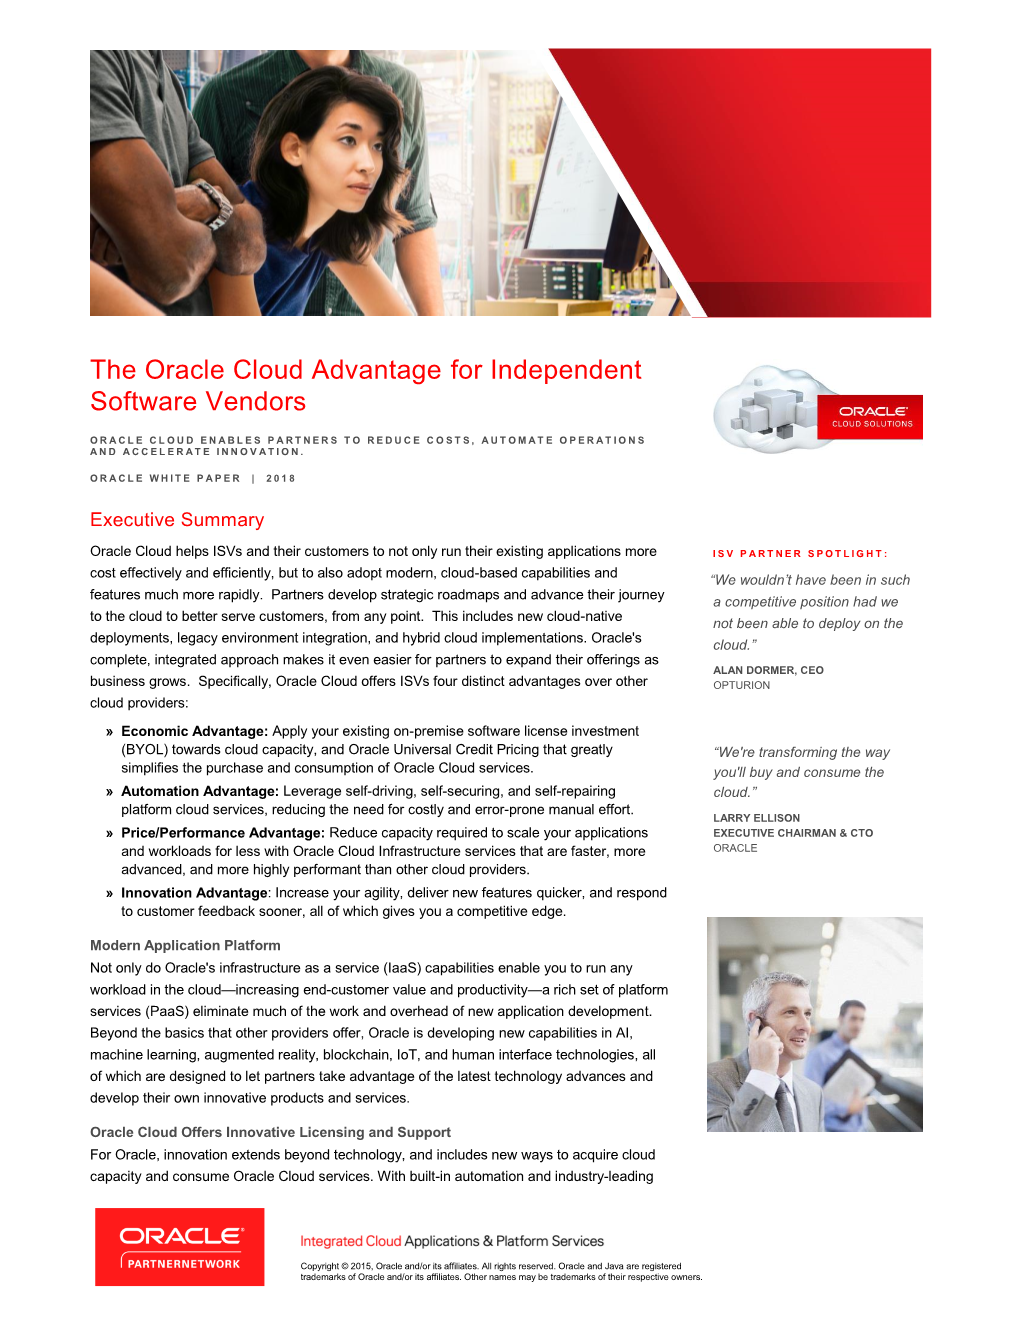 The Oracle Cloud Advantages for Independent Software Vendors